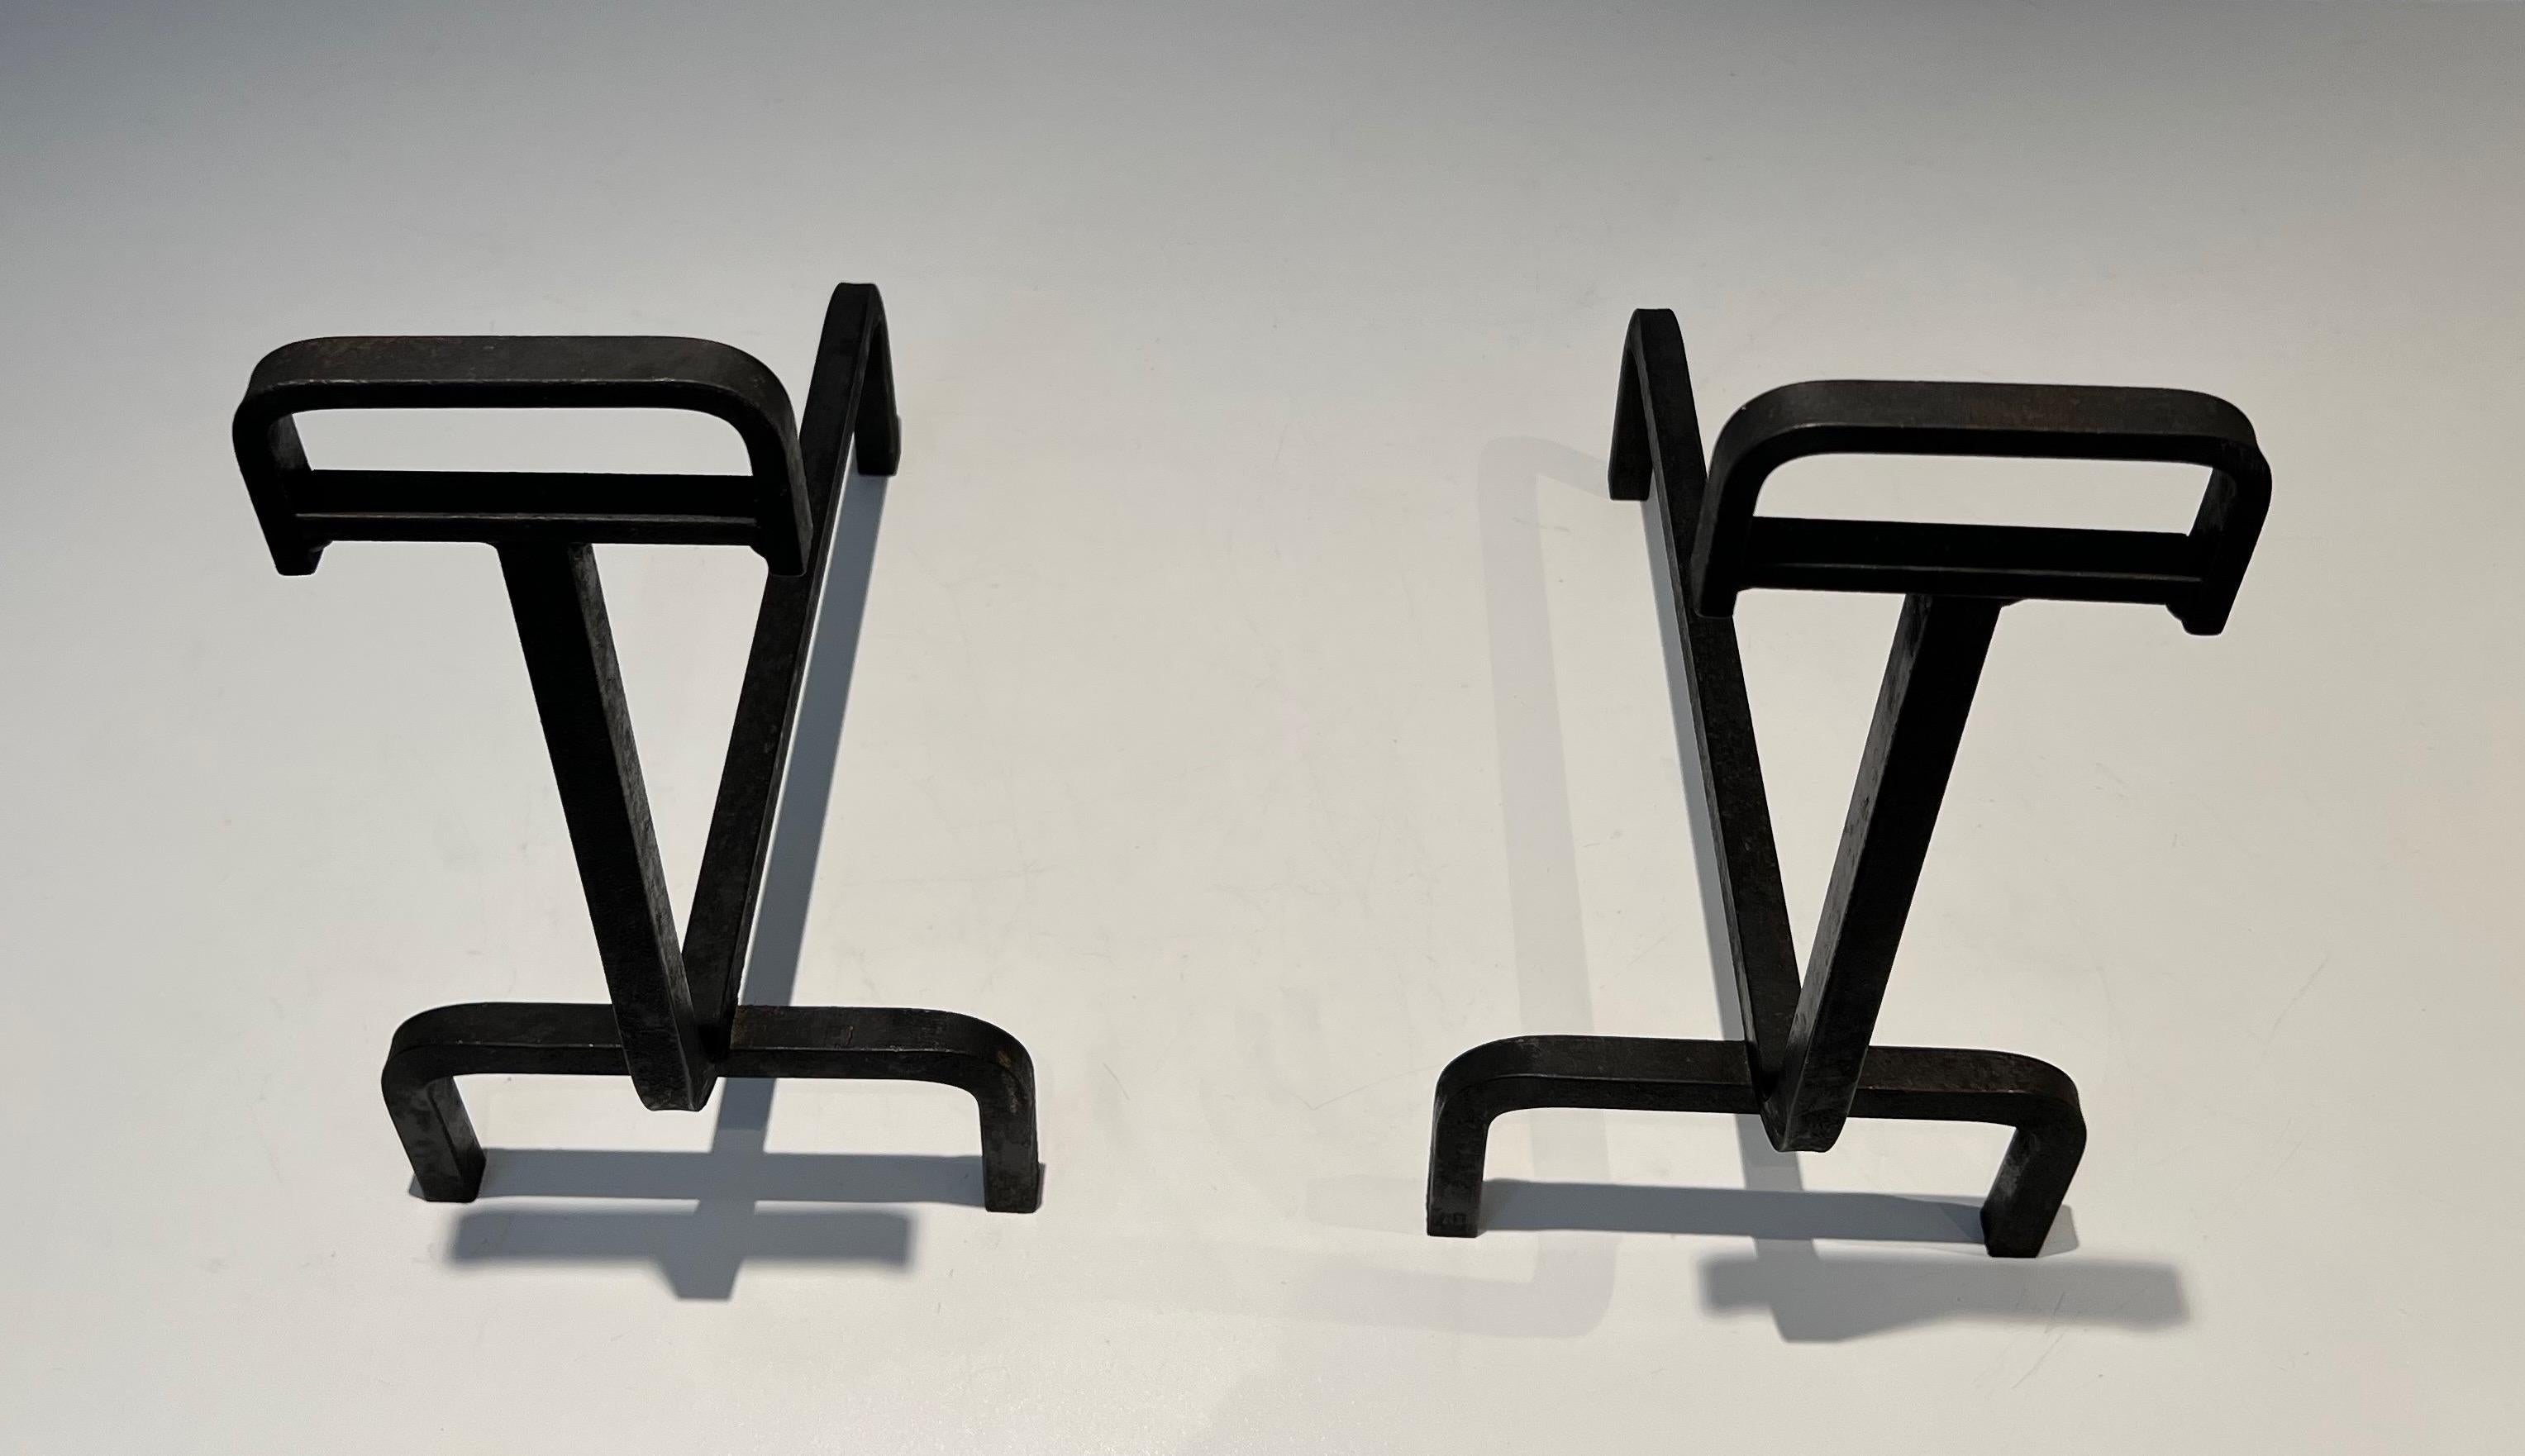 Pair of Wrought Iron Andirons In Good Condition For Sale In Marcq-en-Barœul, Hauts-de-France